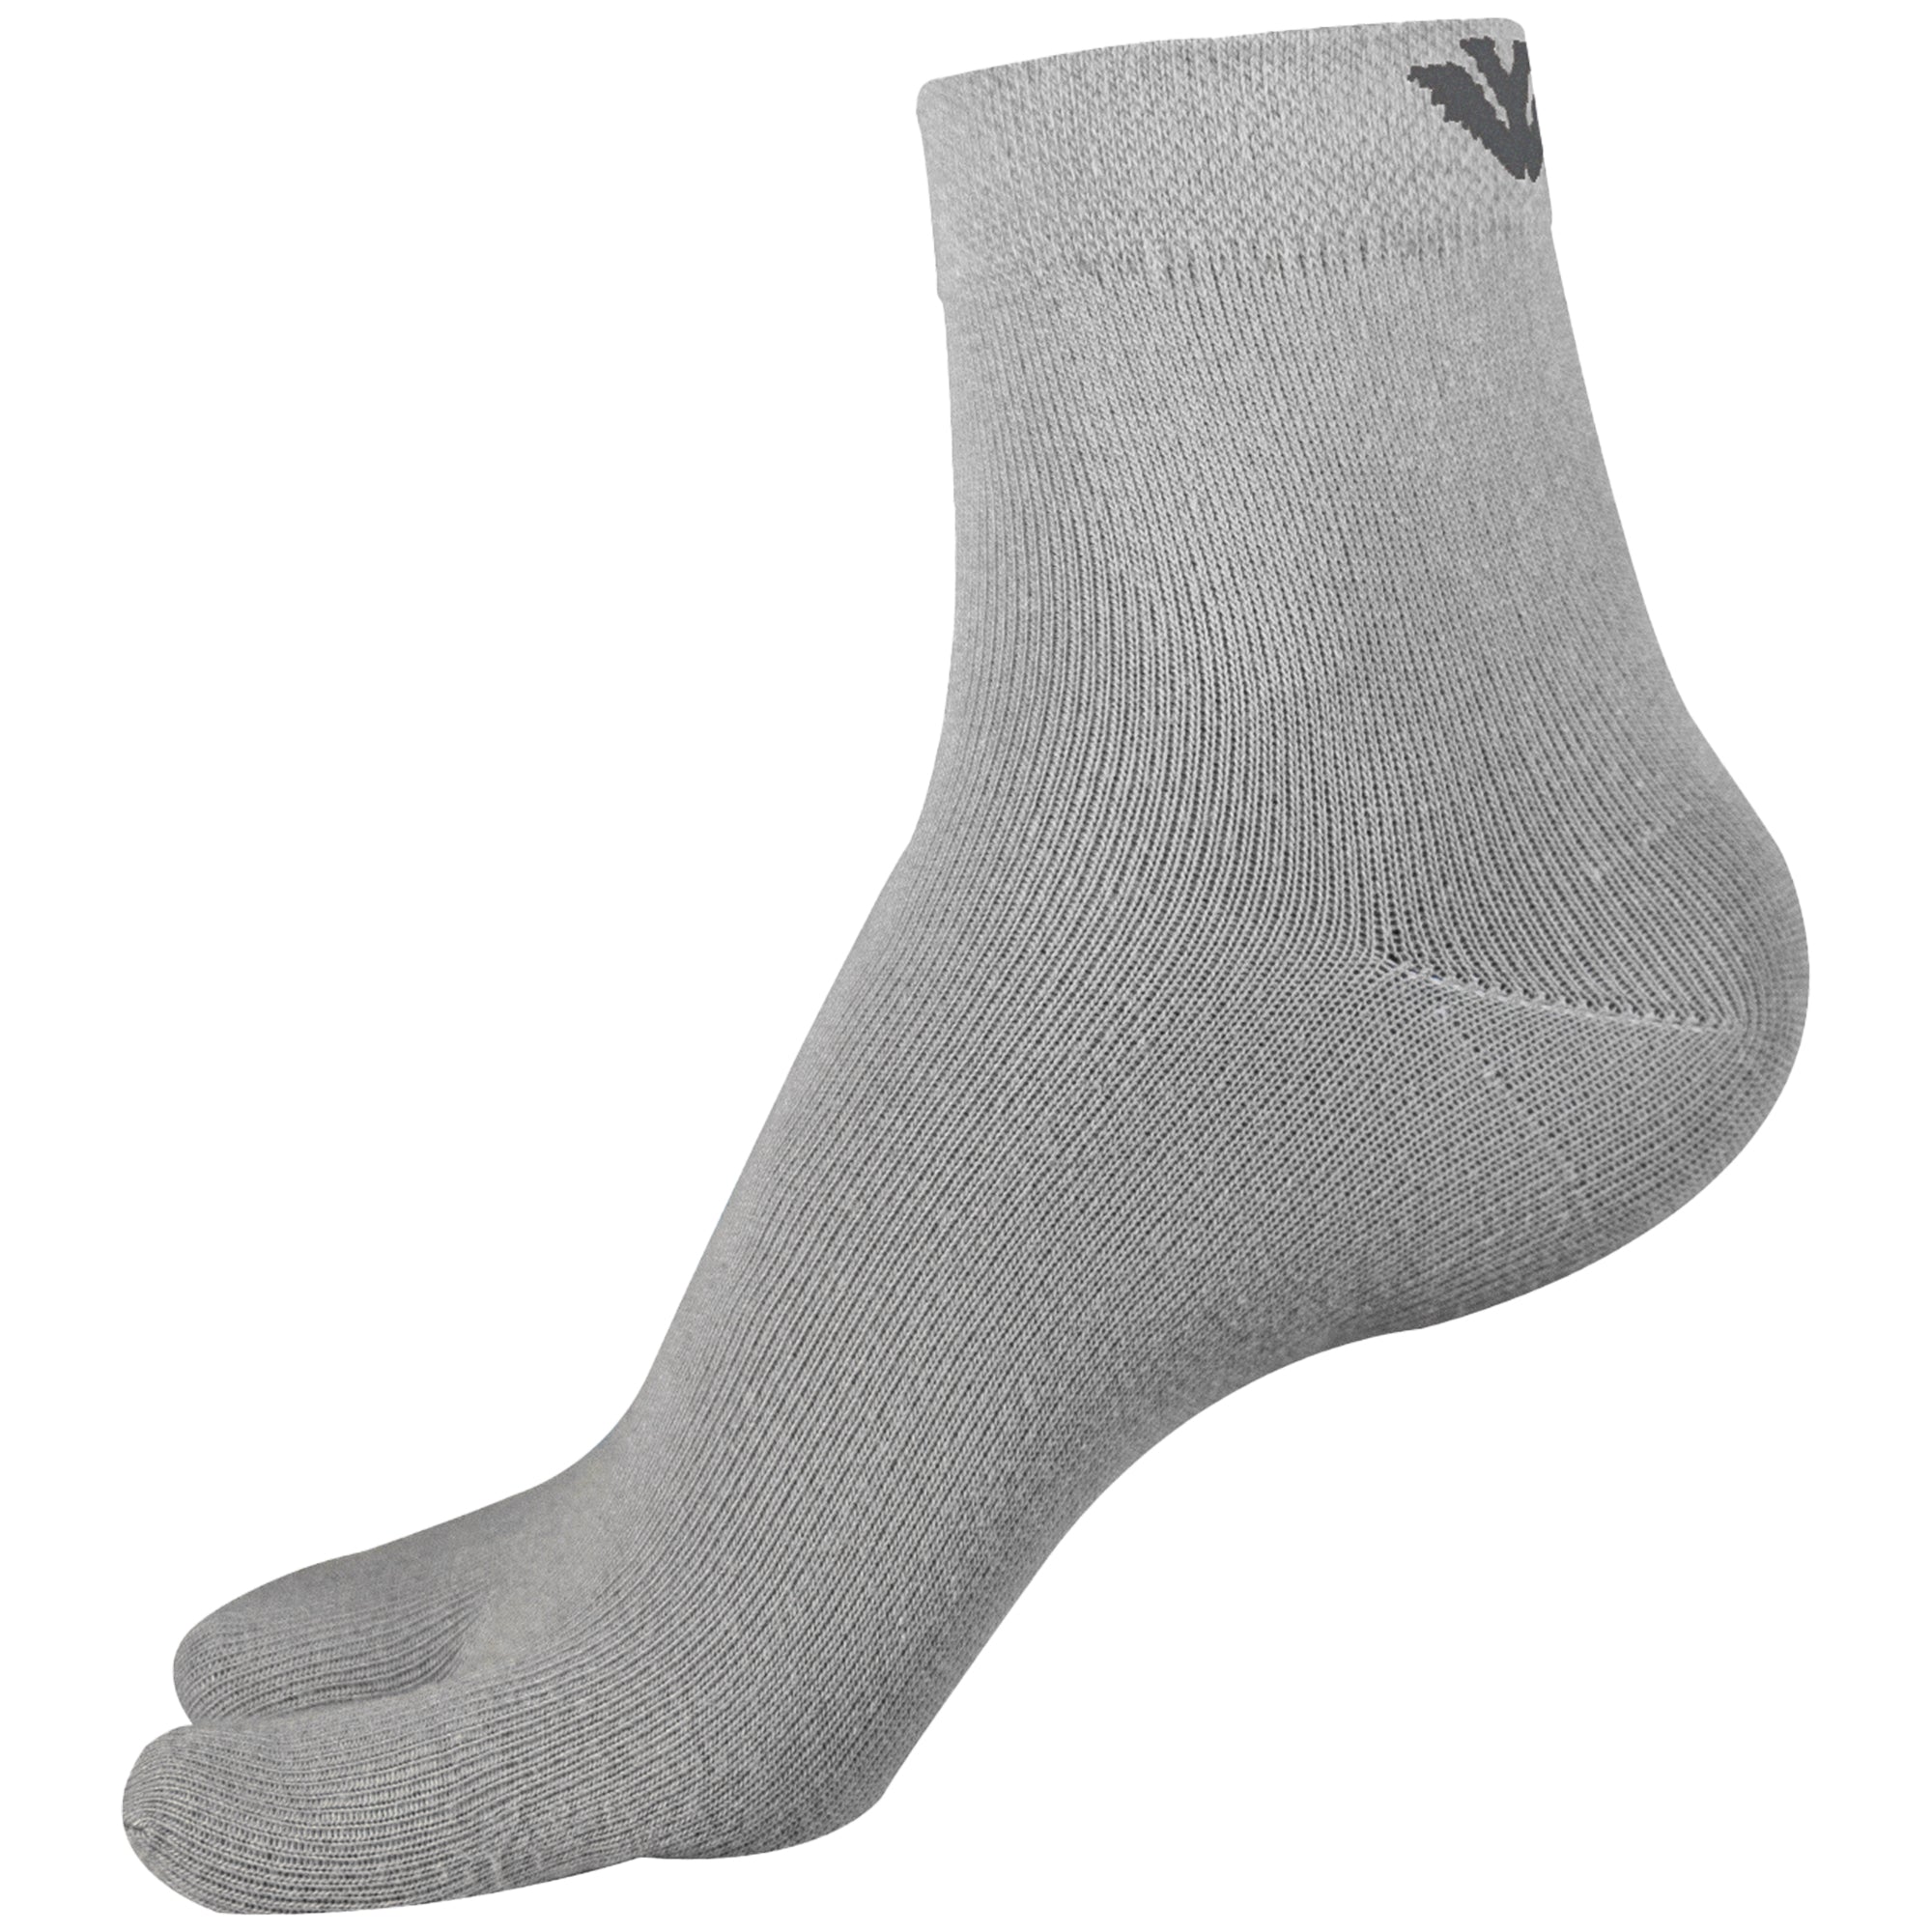 Young Wings Antibacterial Womens Cotton Thumb Ankle Socks 5001 - Pack of 3